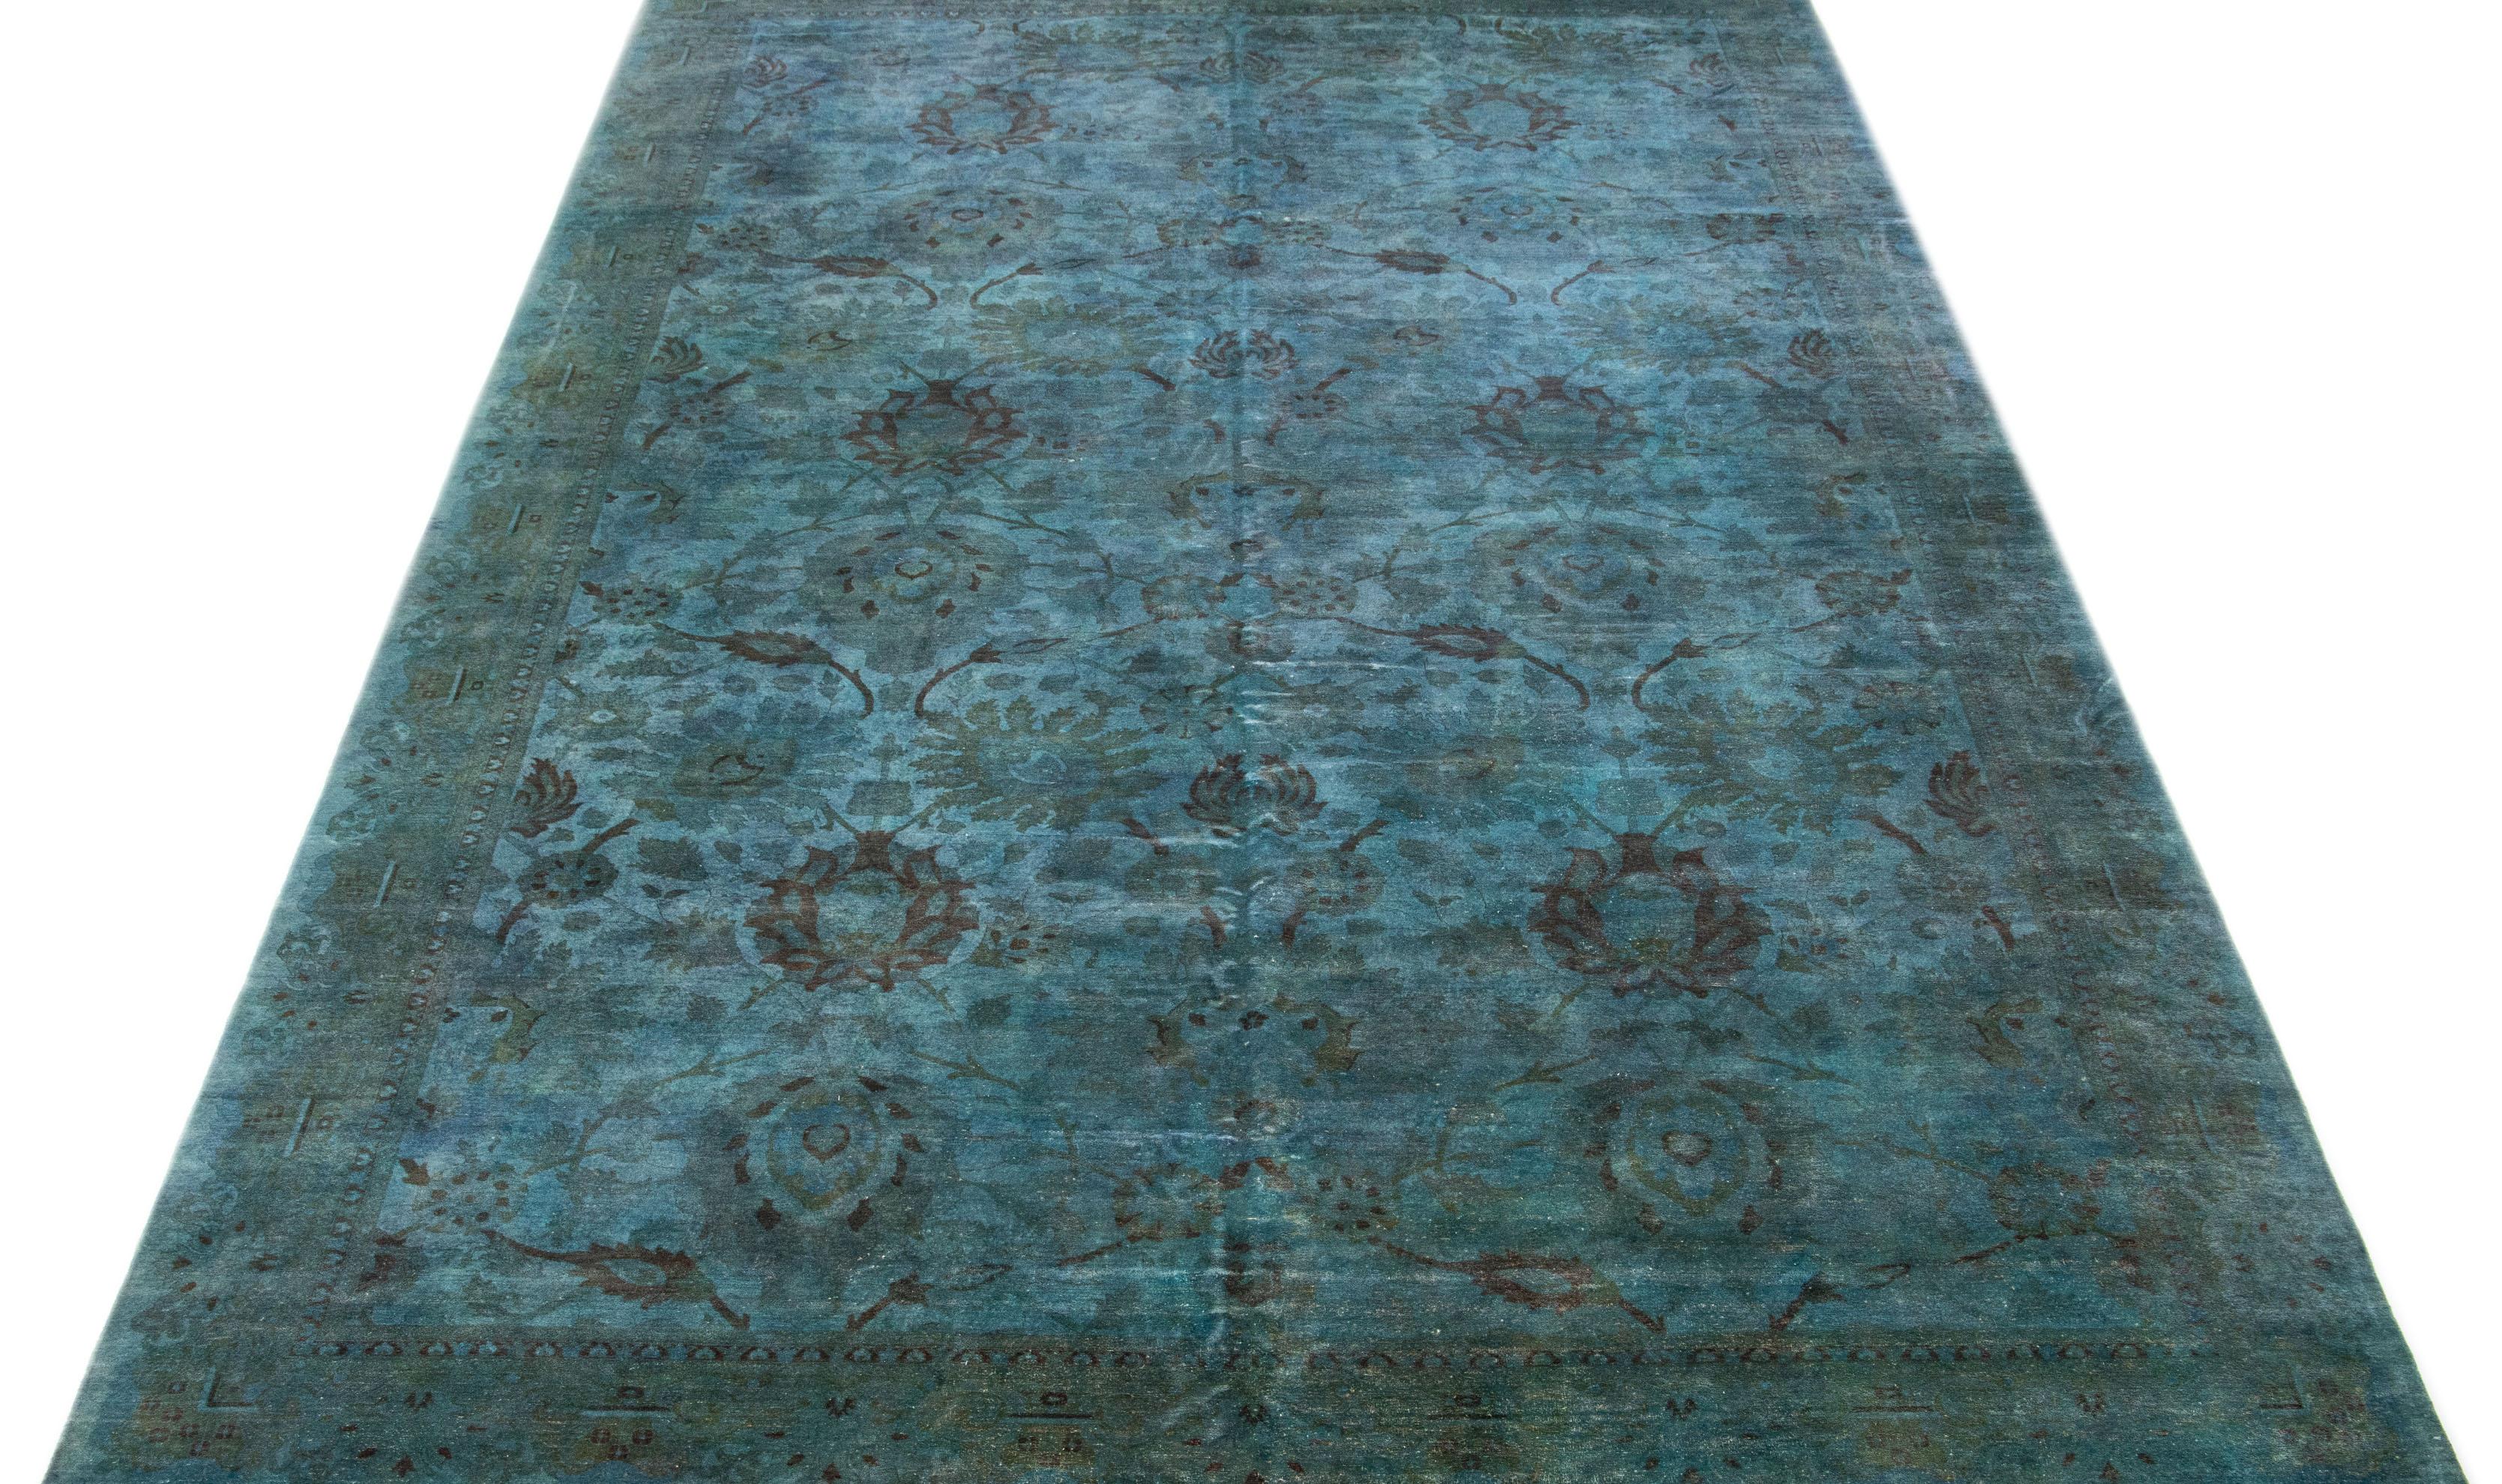 This impressive handmade wool rug features a contemporary art & crafts style with a stunning floral design carefully knotted onto a rich turquoise field. The design is enhanced with various hues of brown that beautifully complement the floral